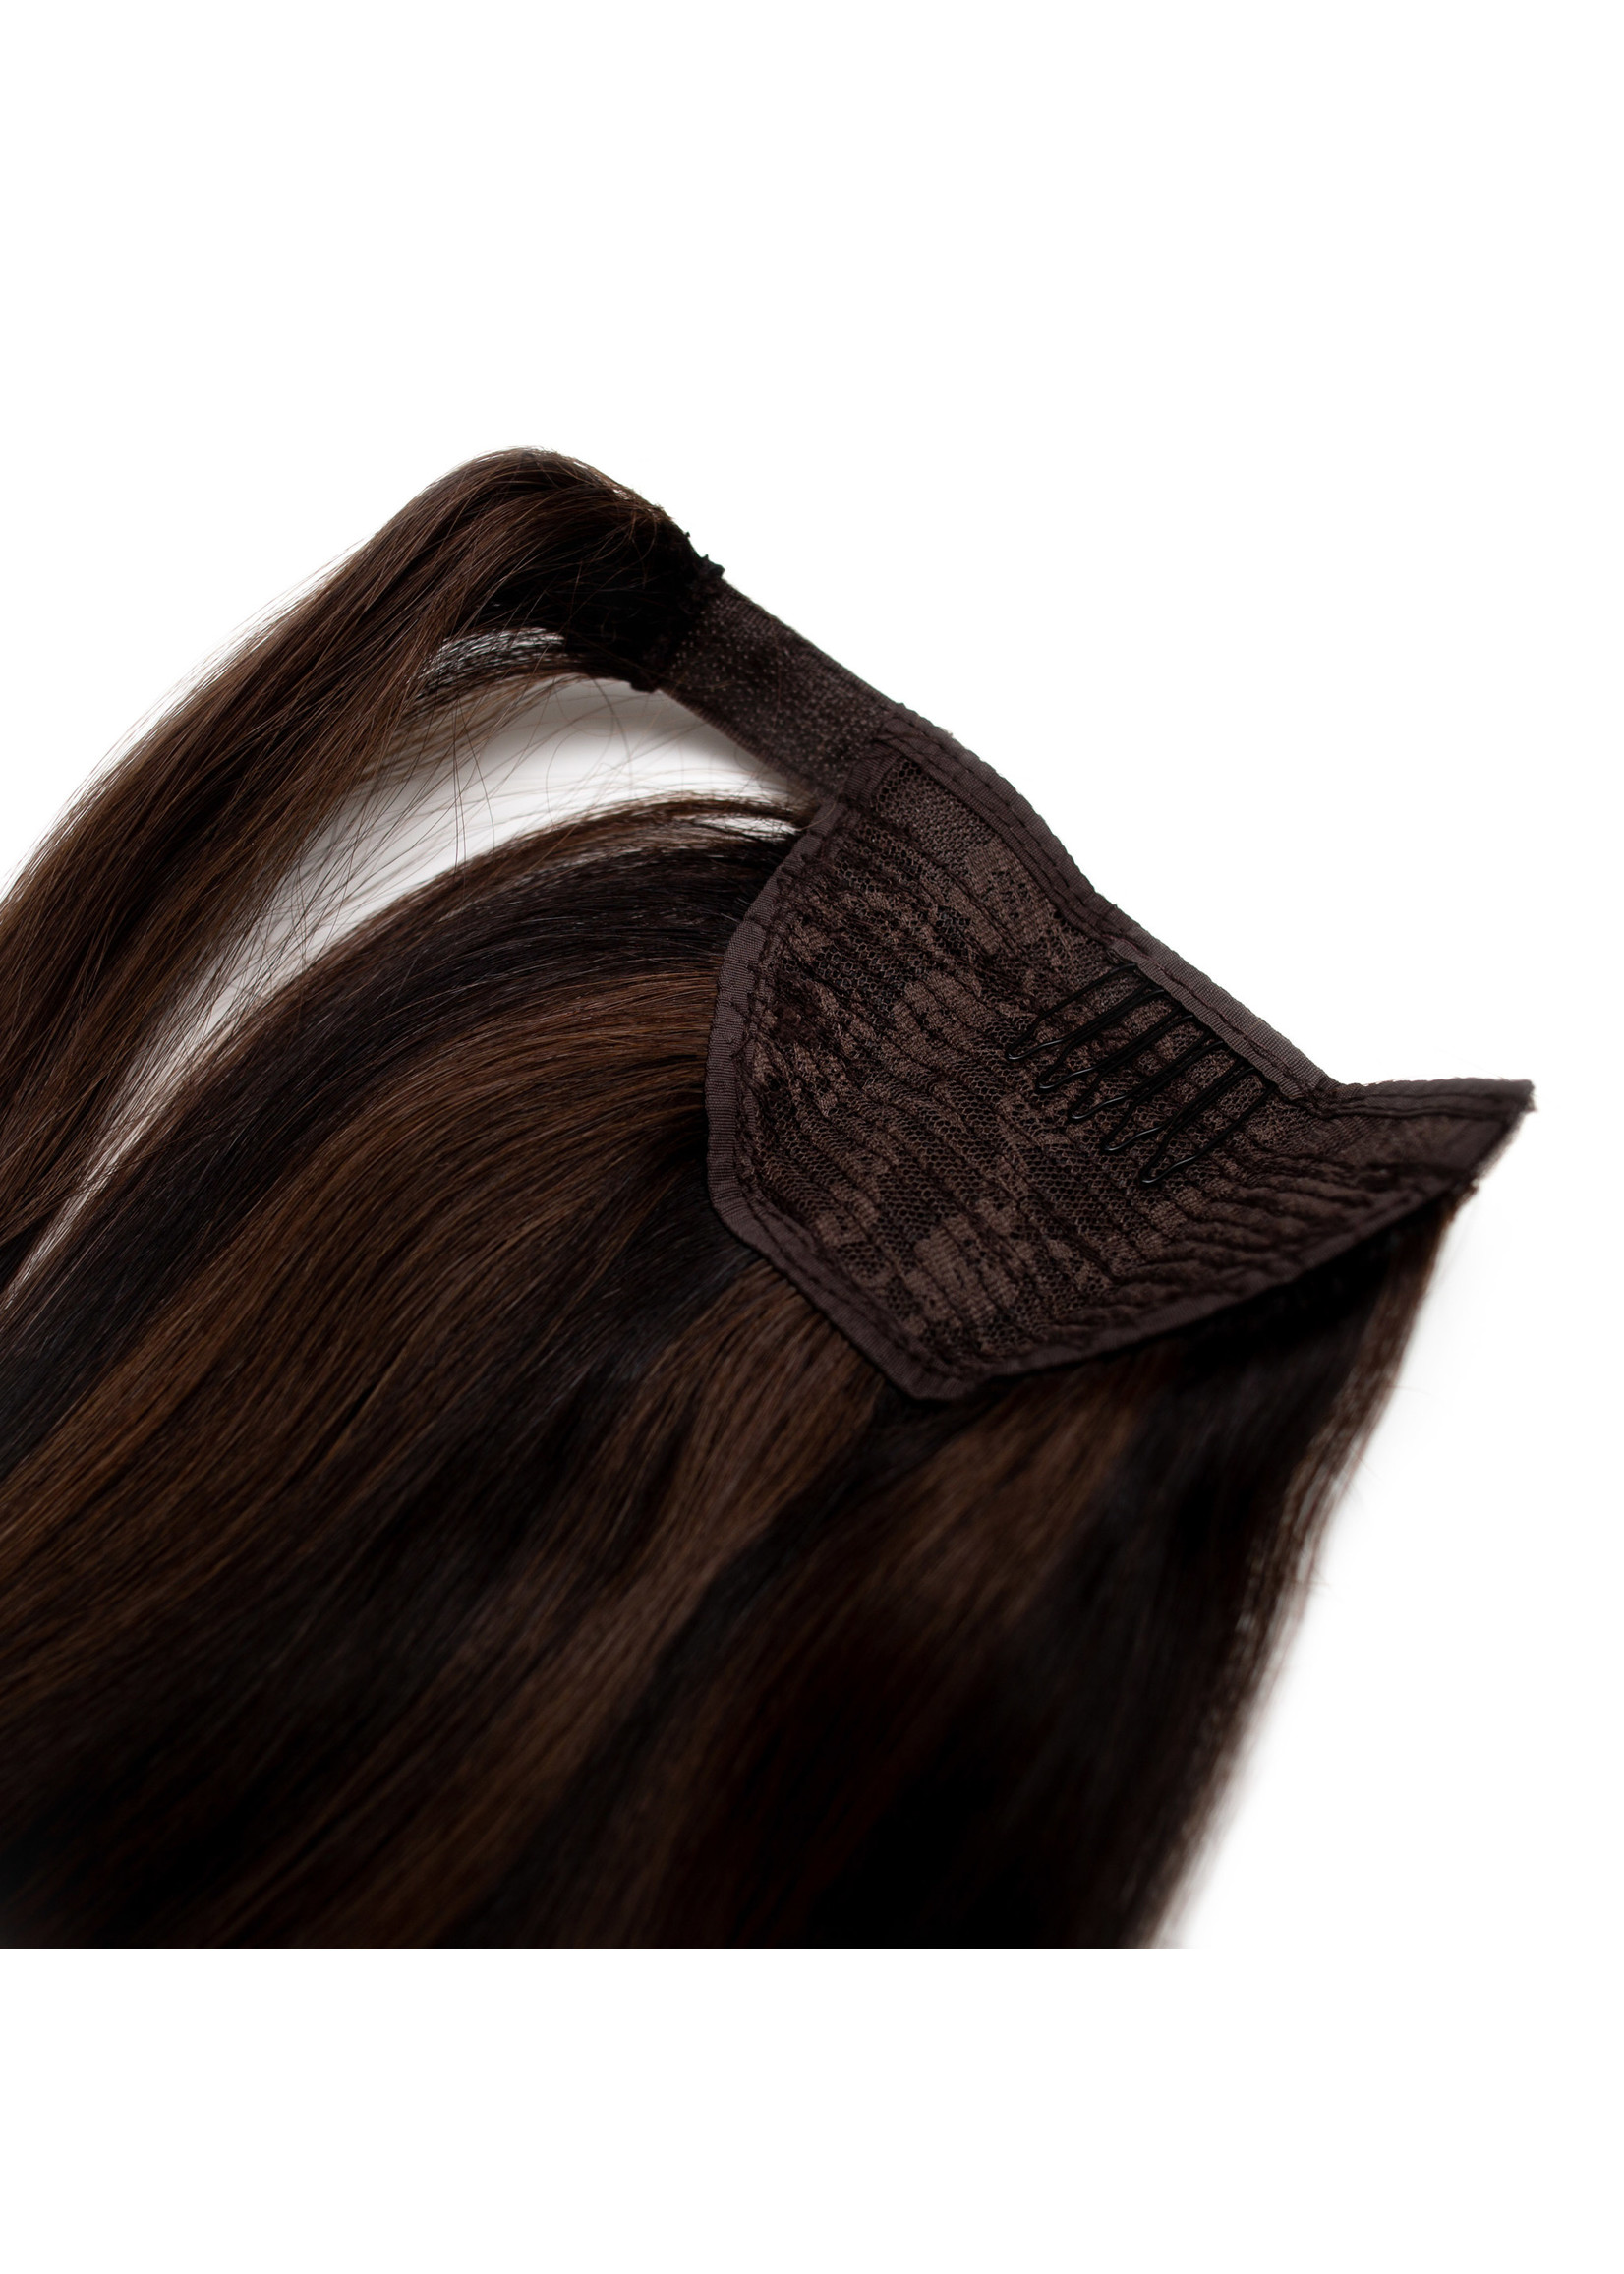 Seamless1 Seamless1 Ponytail Human Hair Extension 21.5 Inches - Ritzy Blend Piano